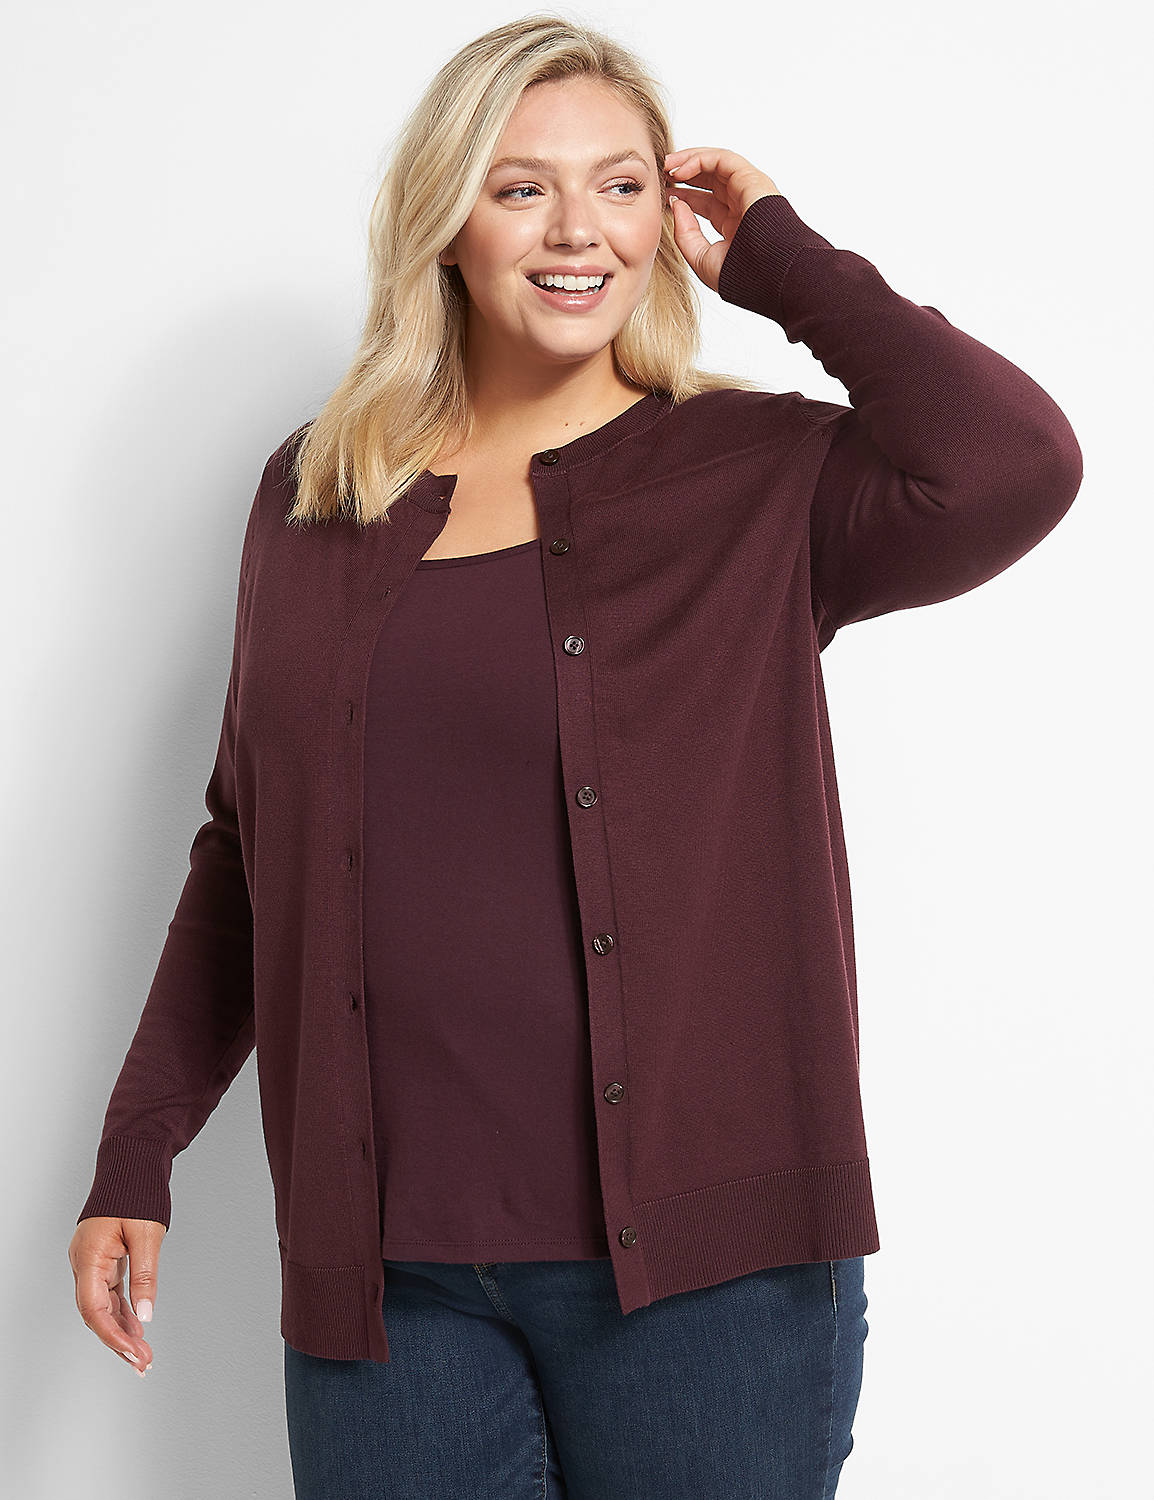 Button-Front Cardigan Product Image 1